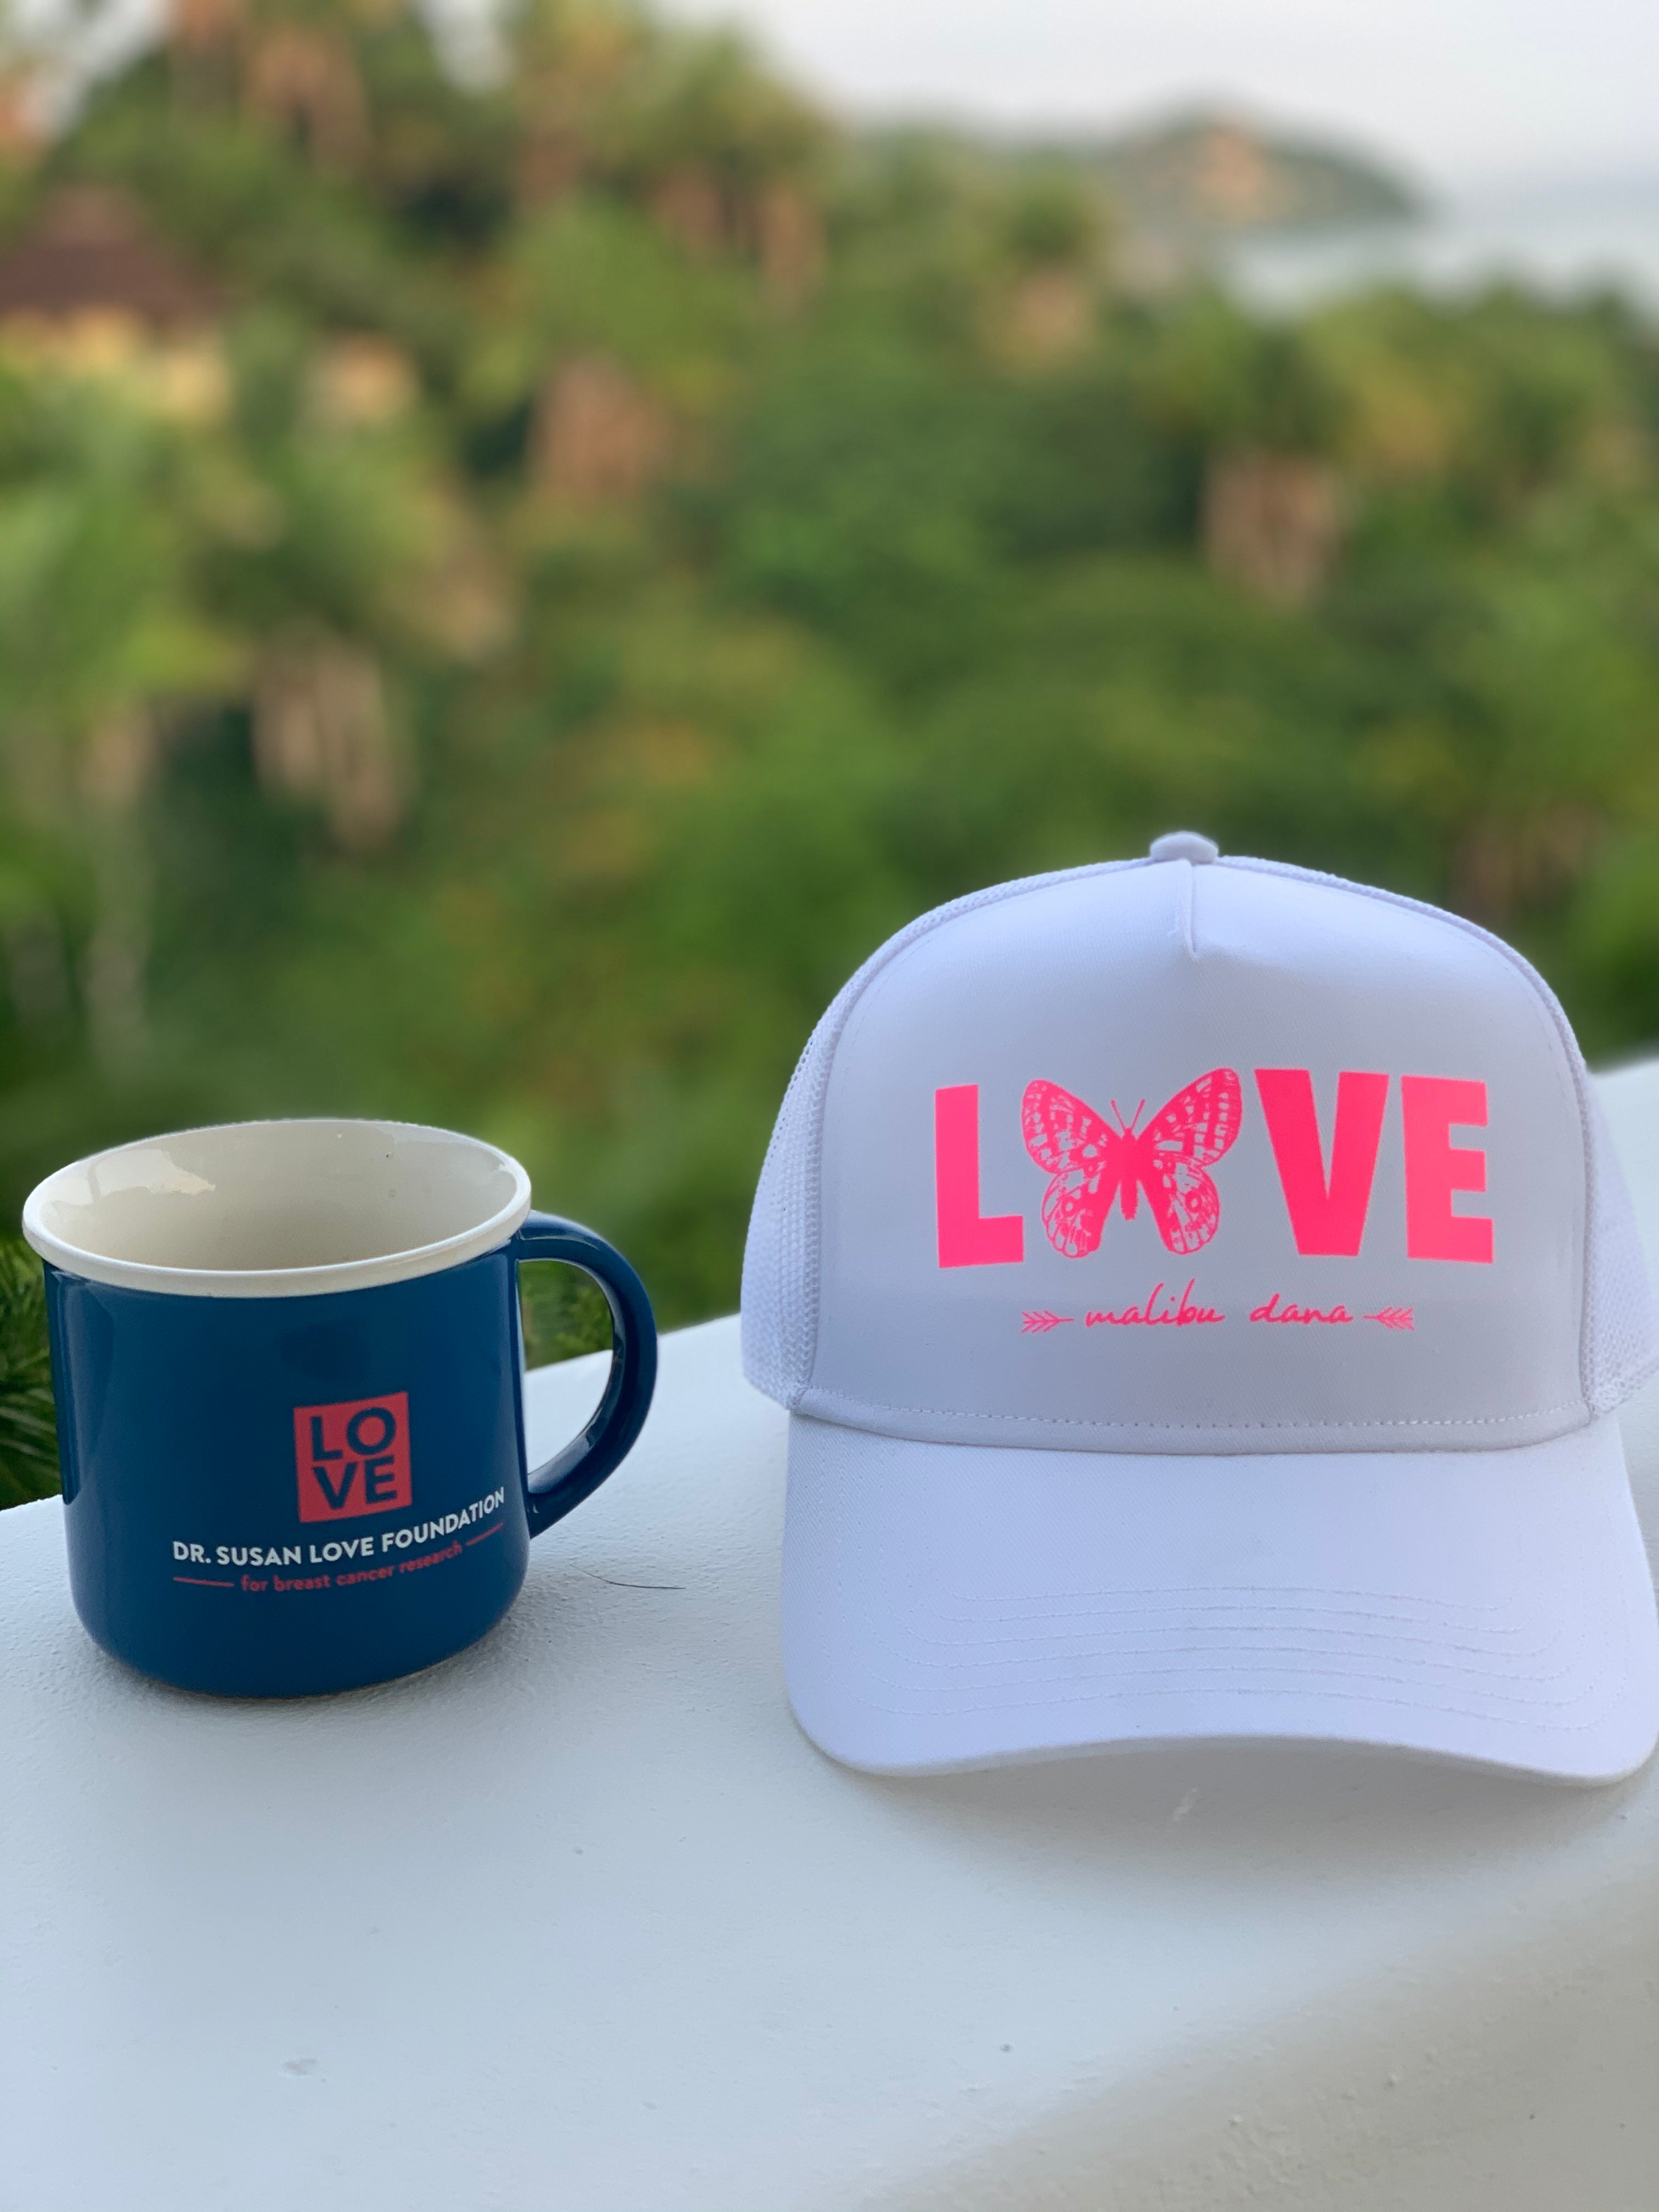 Limited Edition Love Trucker Hat